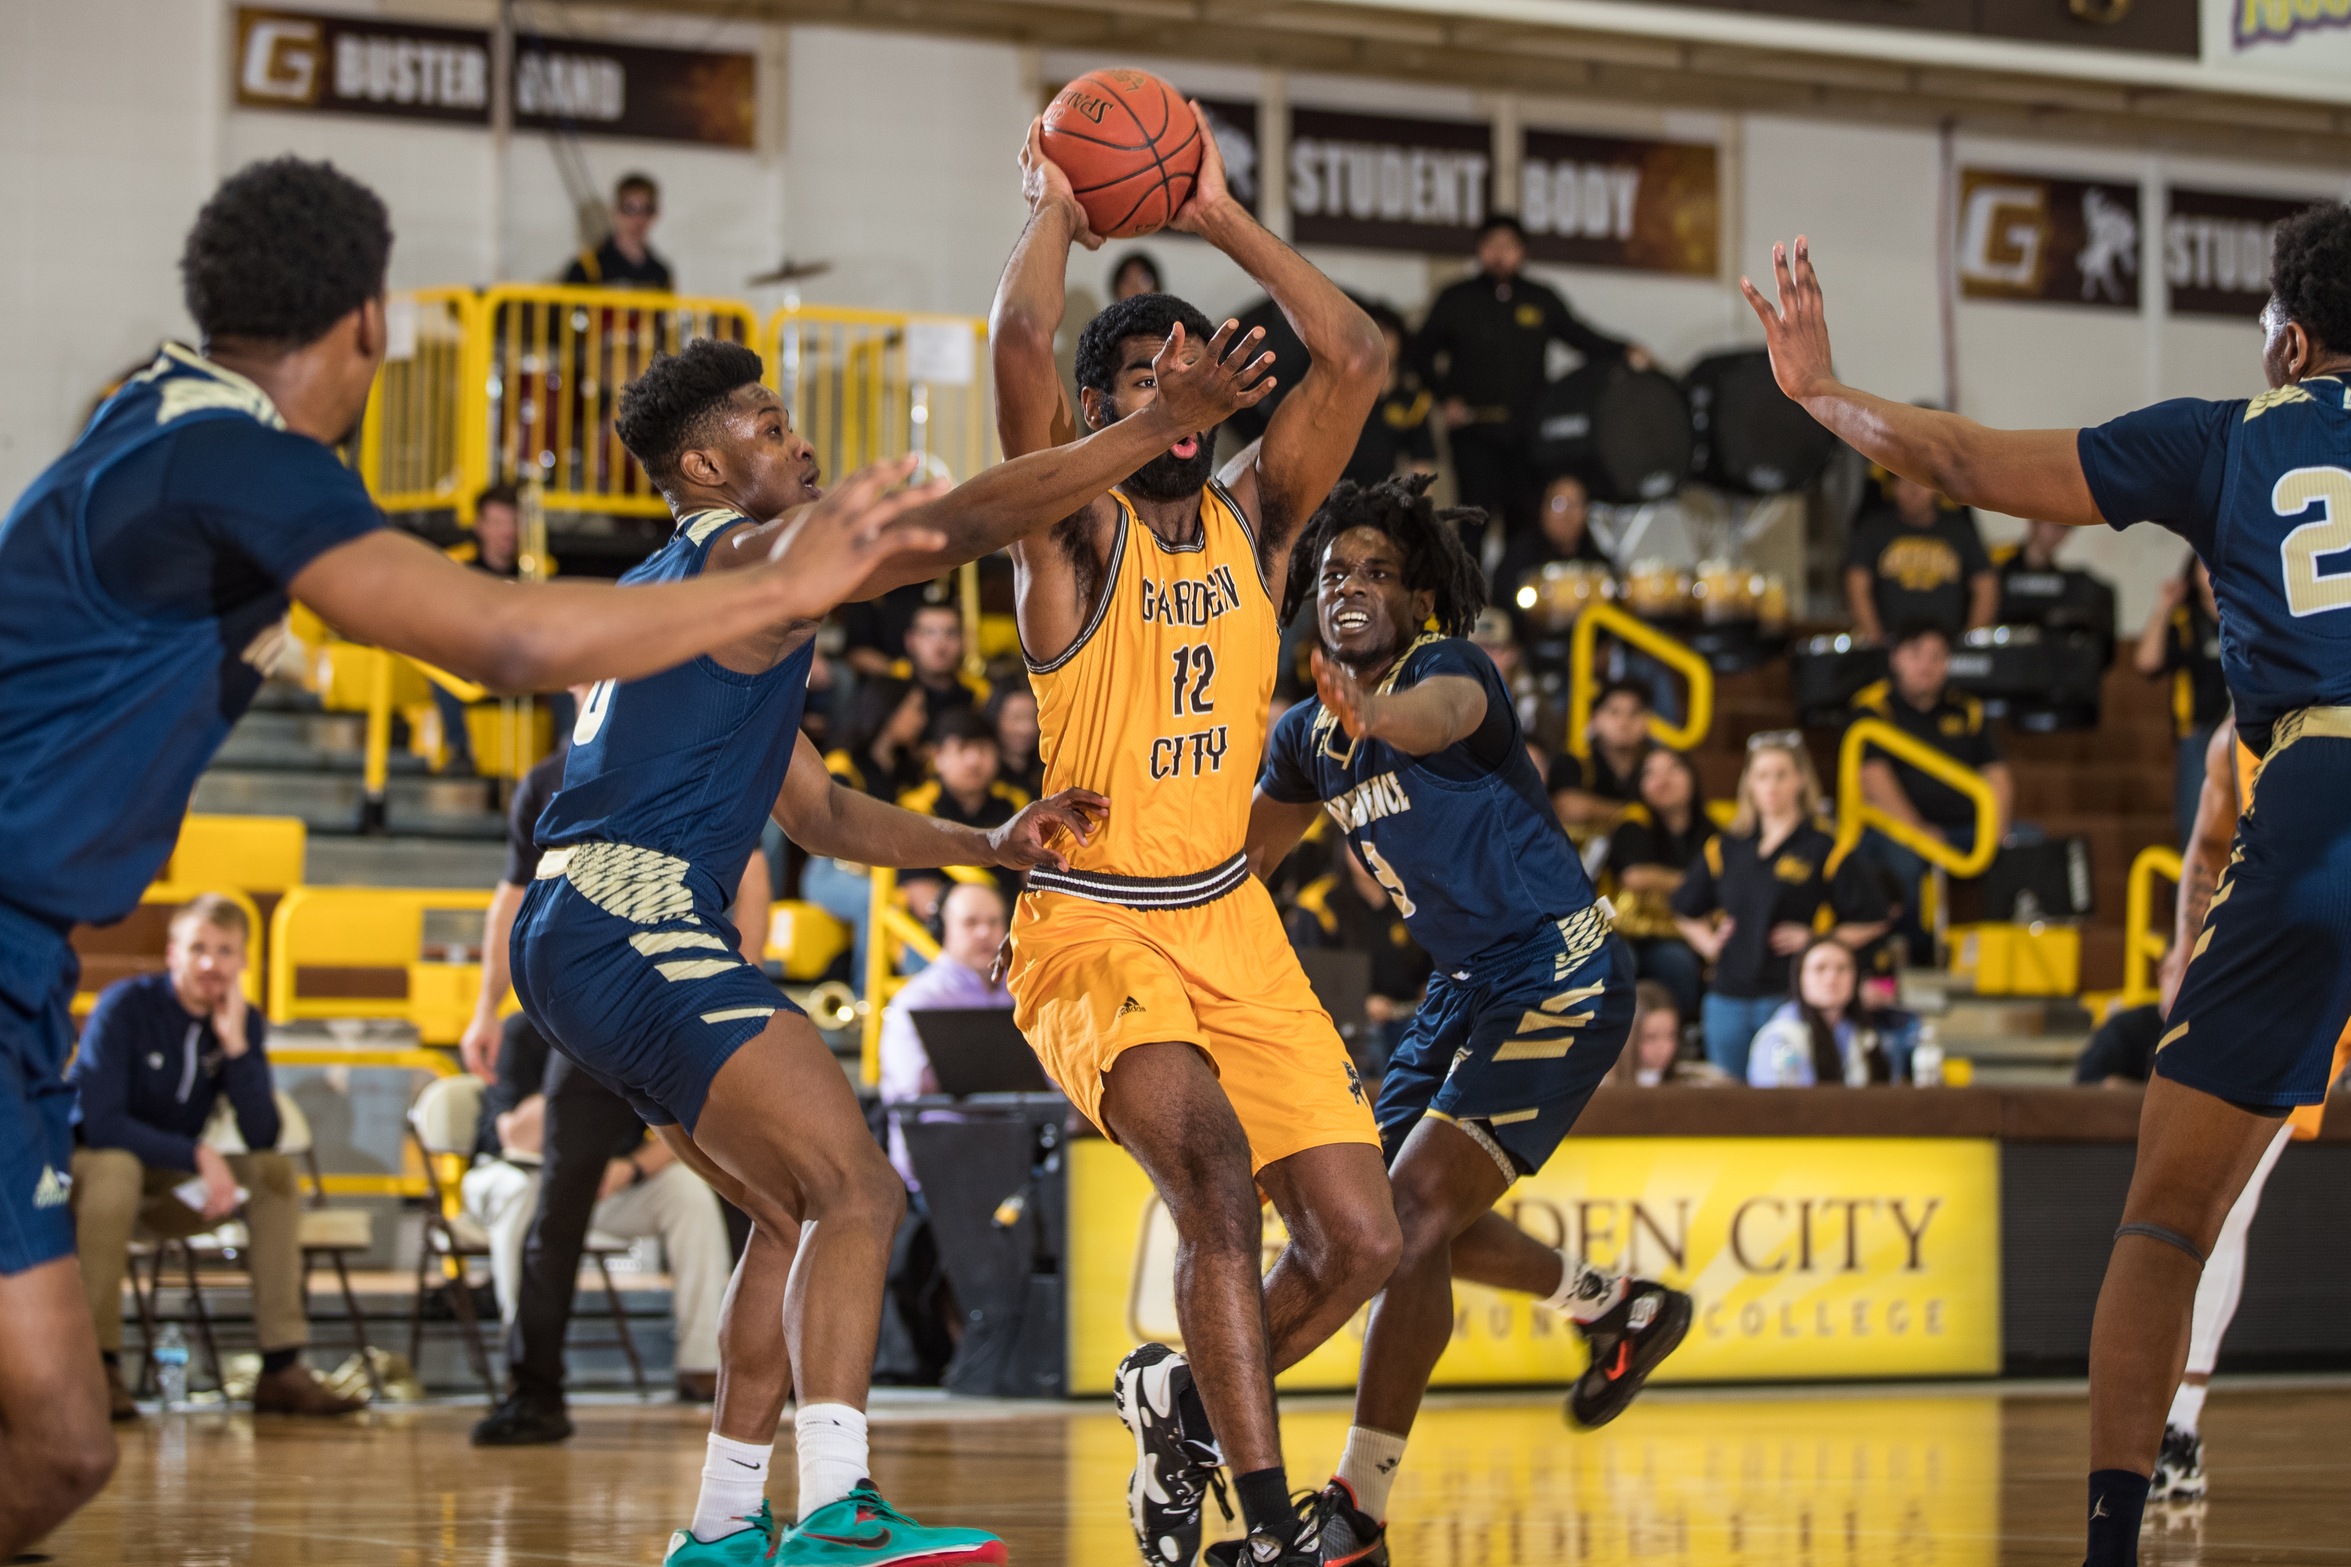 Broncbusters upset in opening round of Region VI Tournament